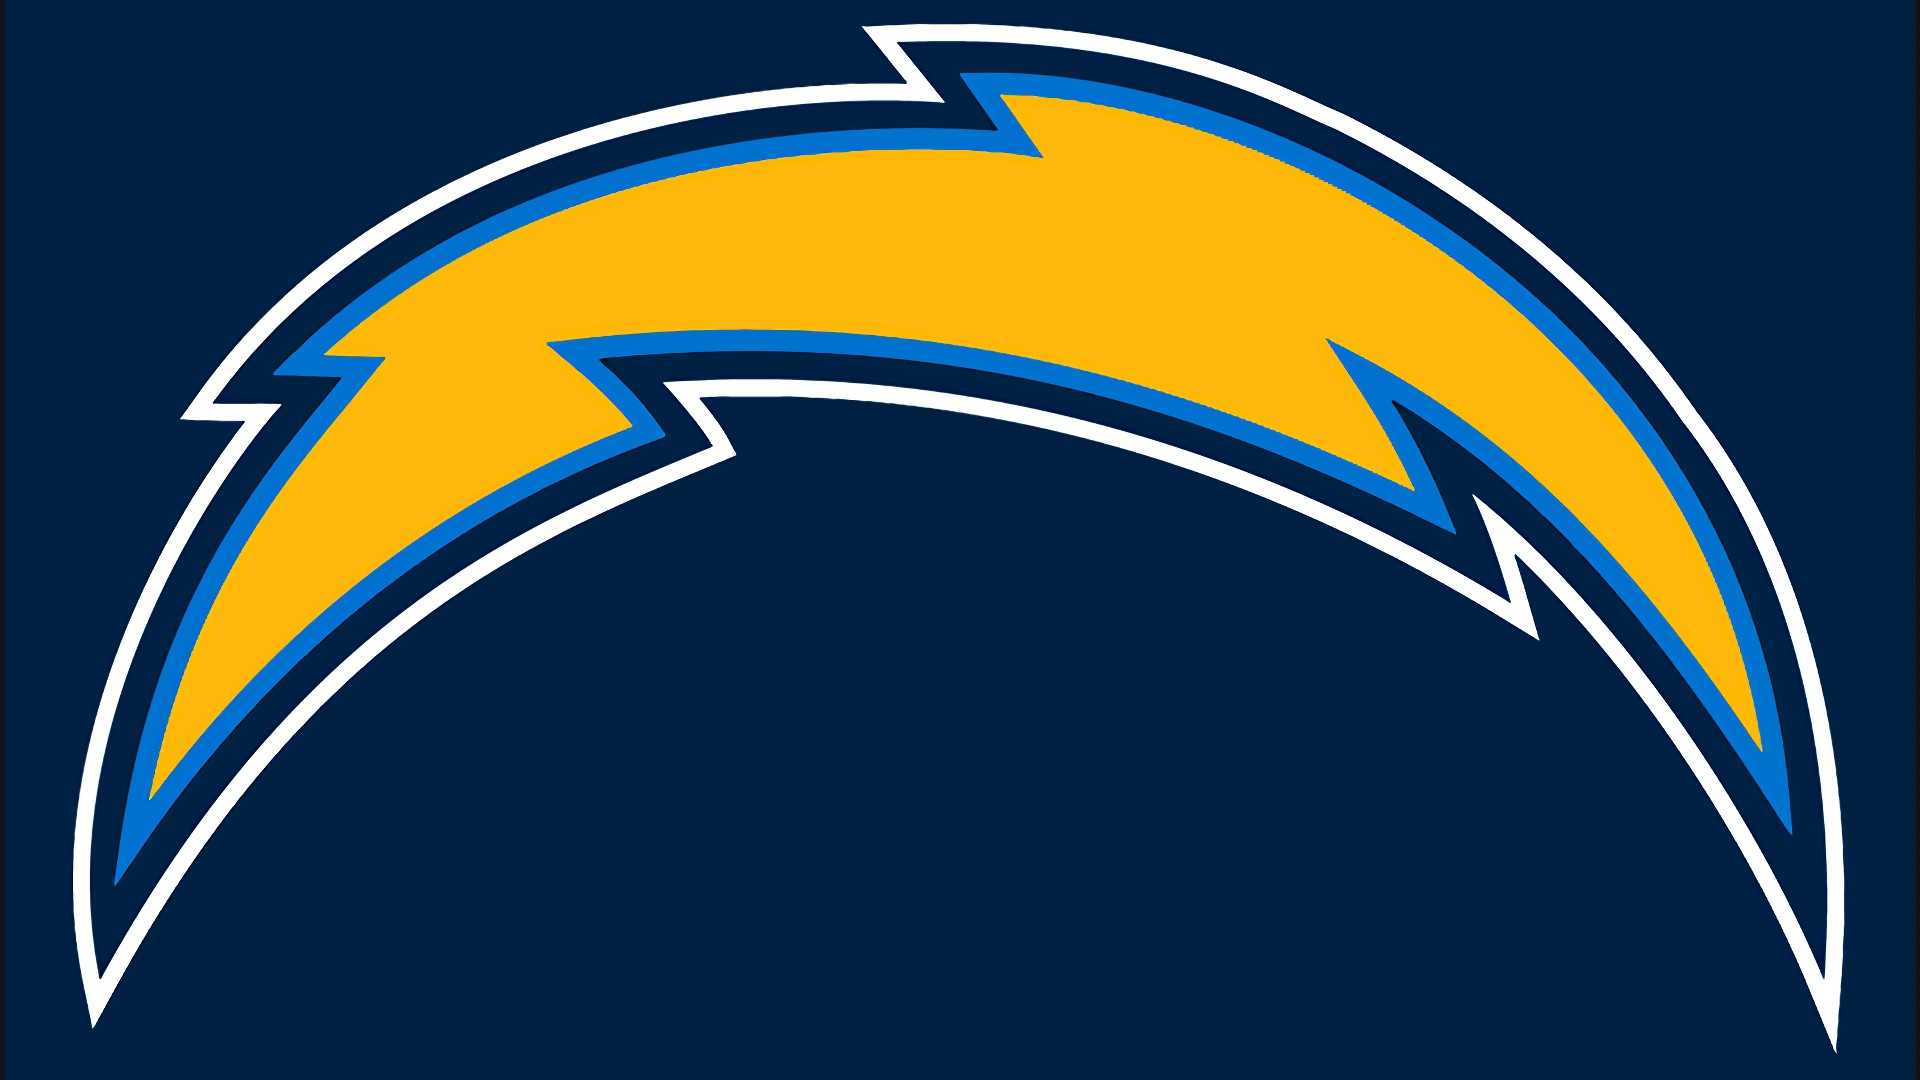 Chargers Wallpaper HD - KoLPaPer - Awesome Free HD Wallpapers